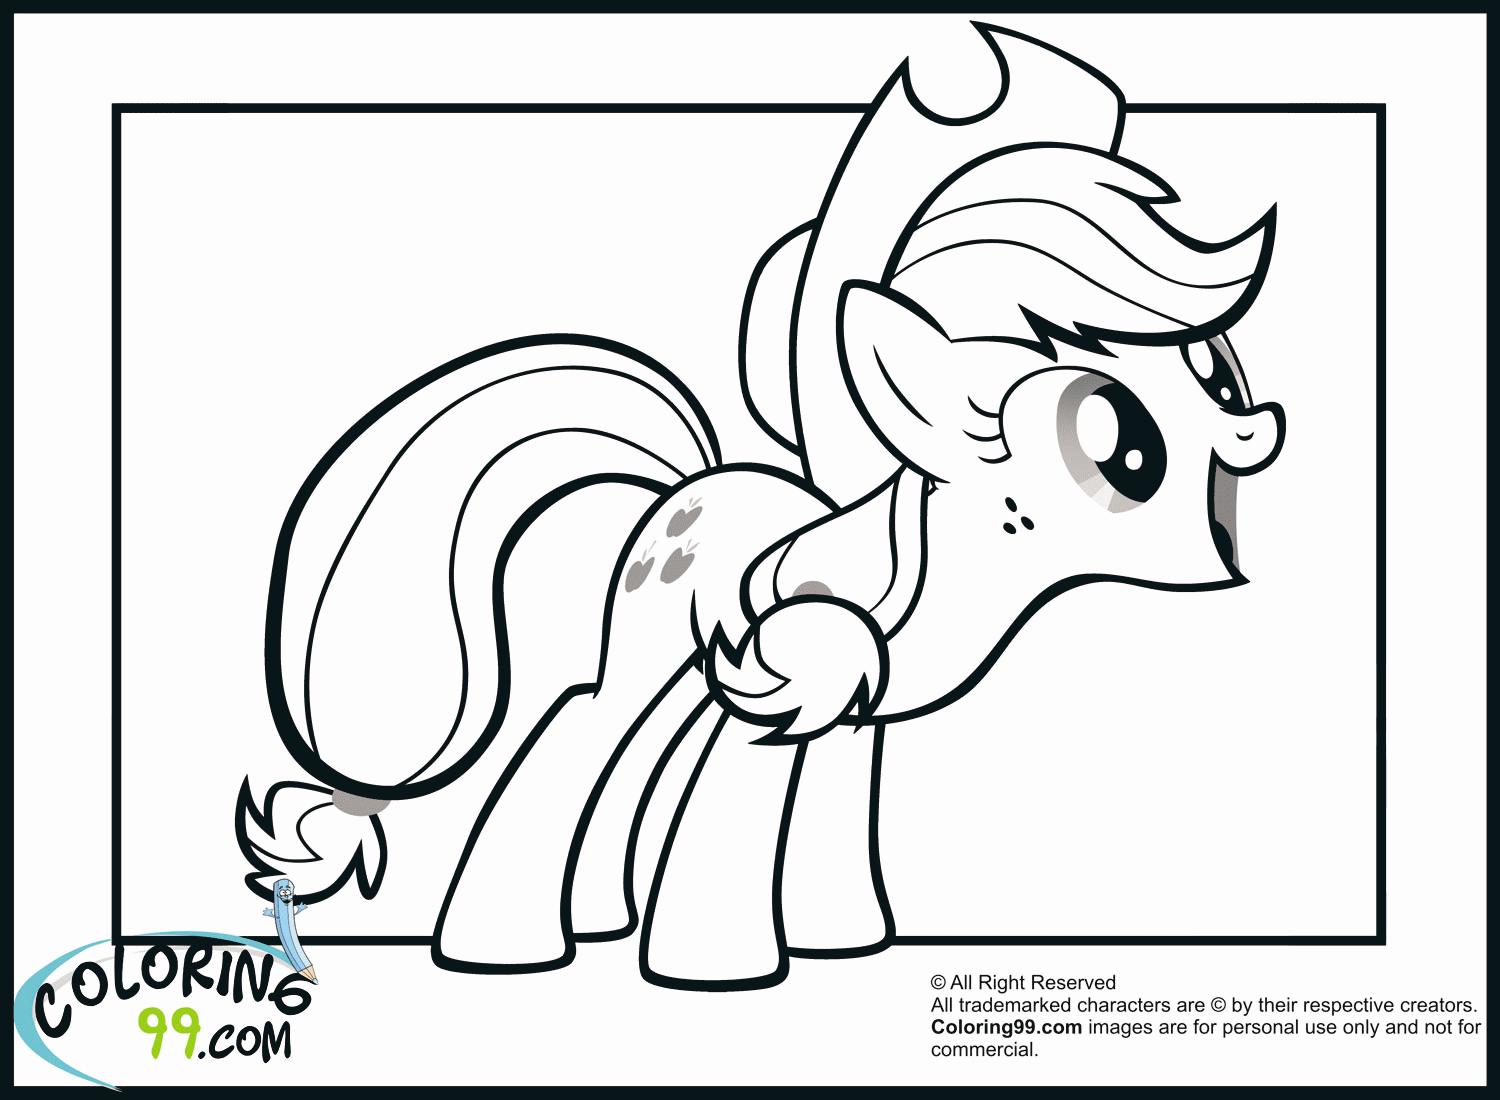 My Little Pony Applejack Coloring Pages | Team colors